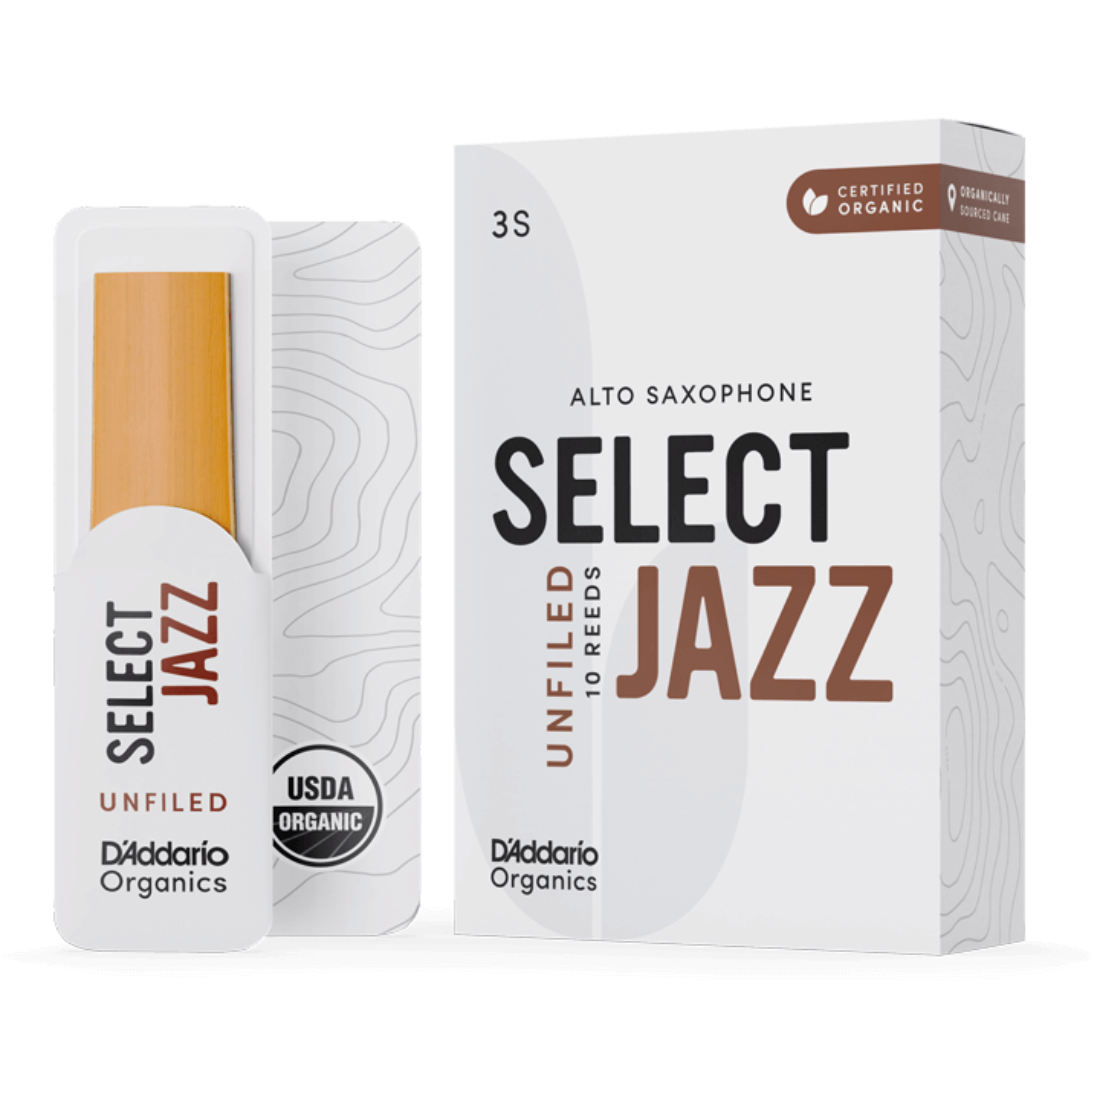 White box of 10 select jazz unfiled alto saxophone reeds - strength of 3 soft